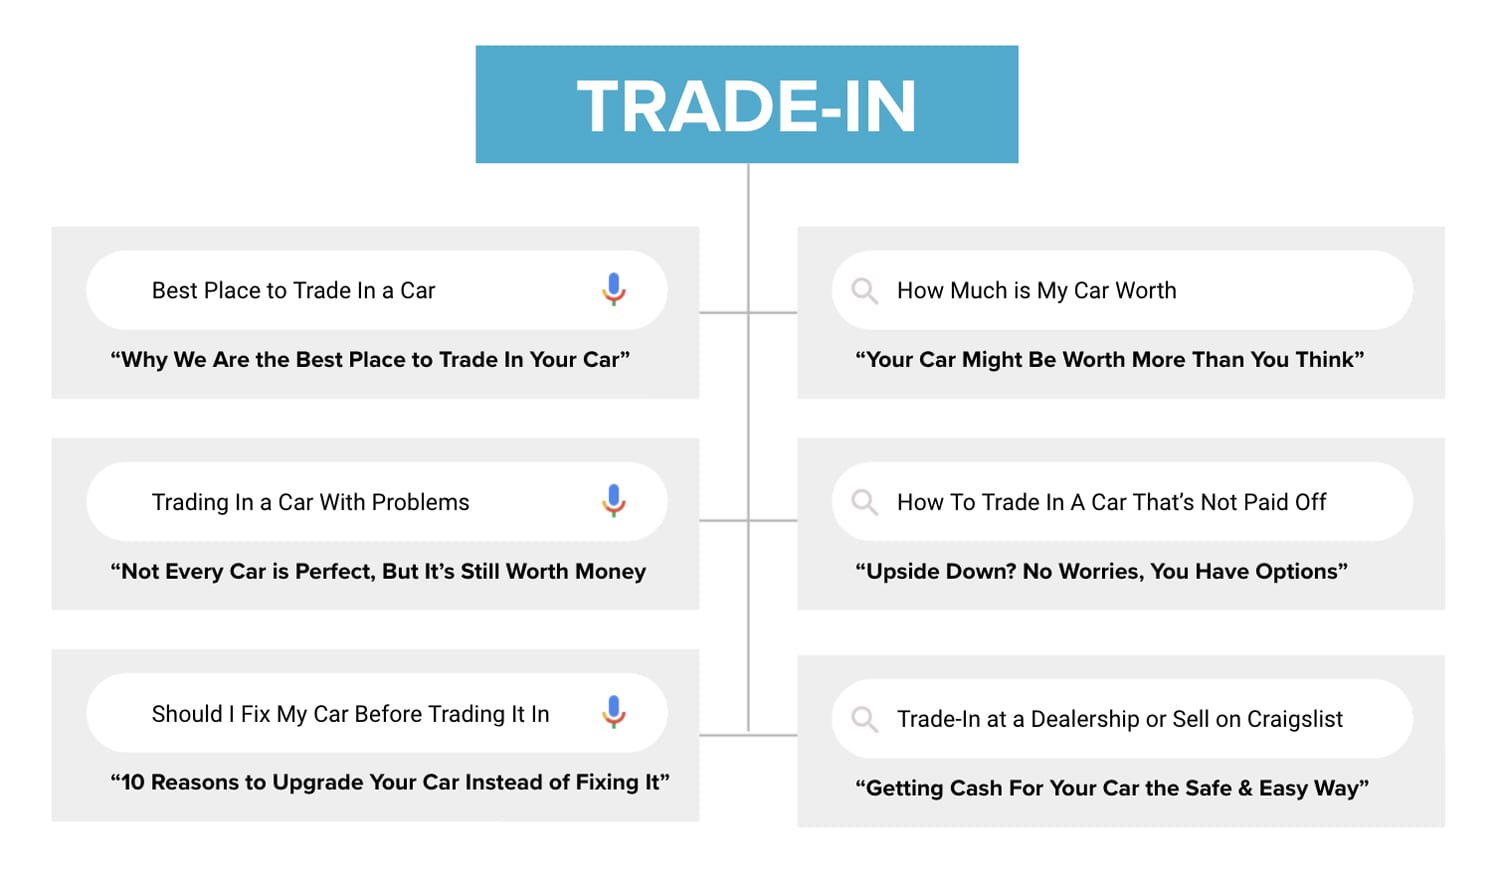 Trade-In SEO Content Strategy